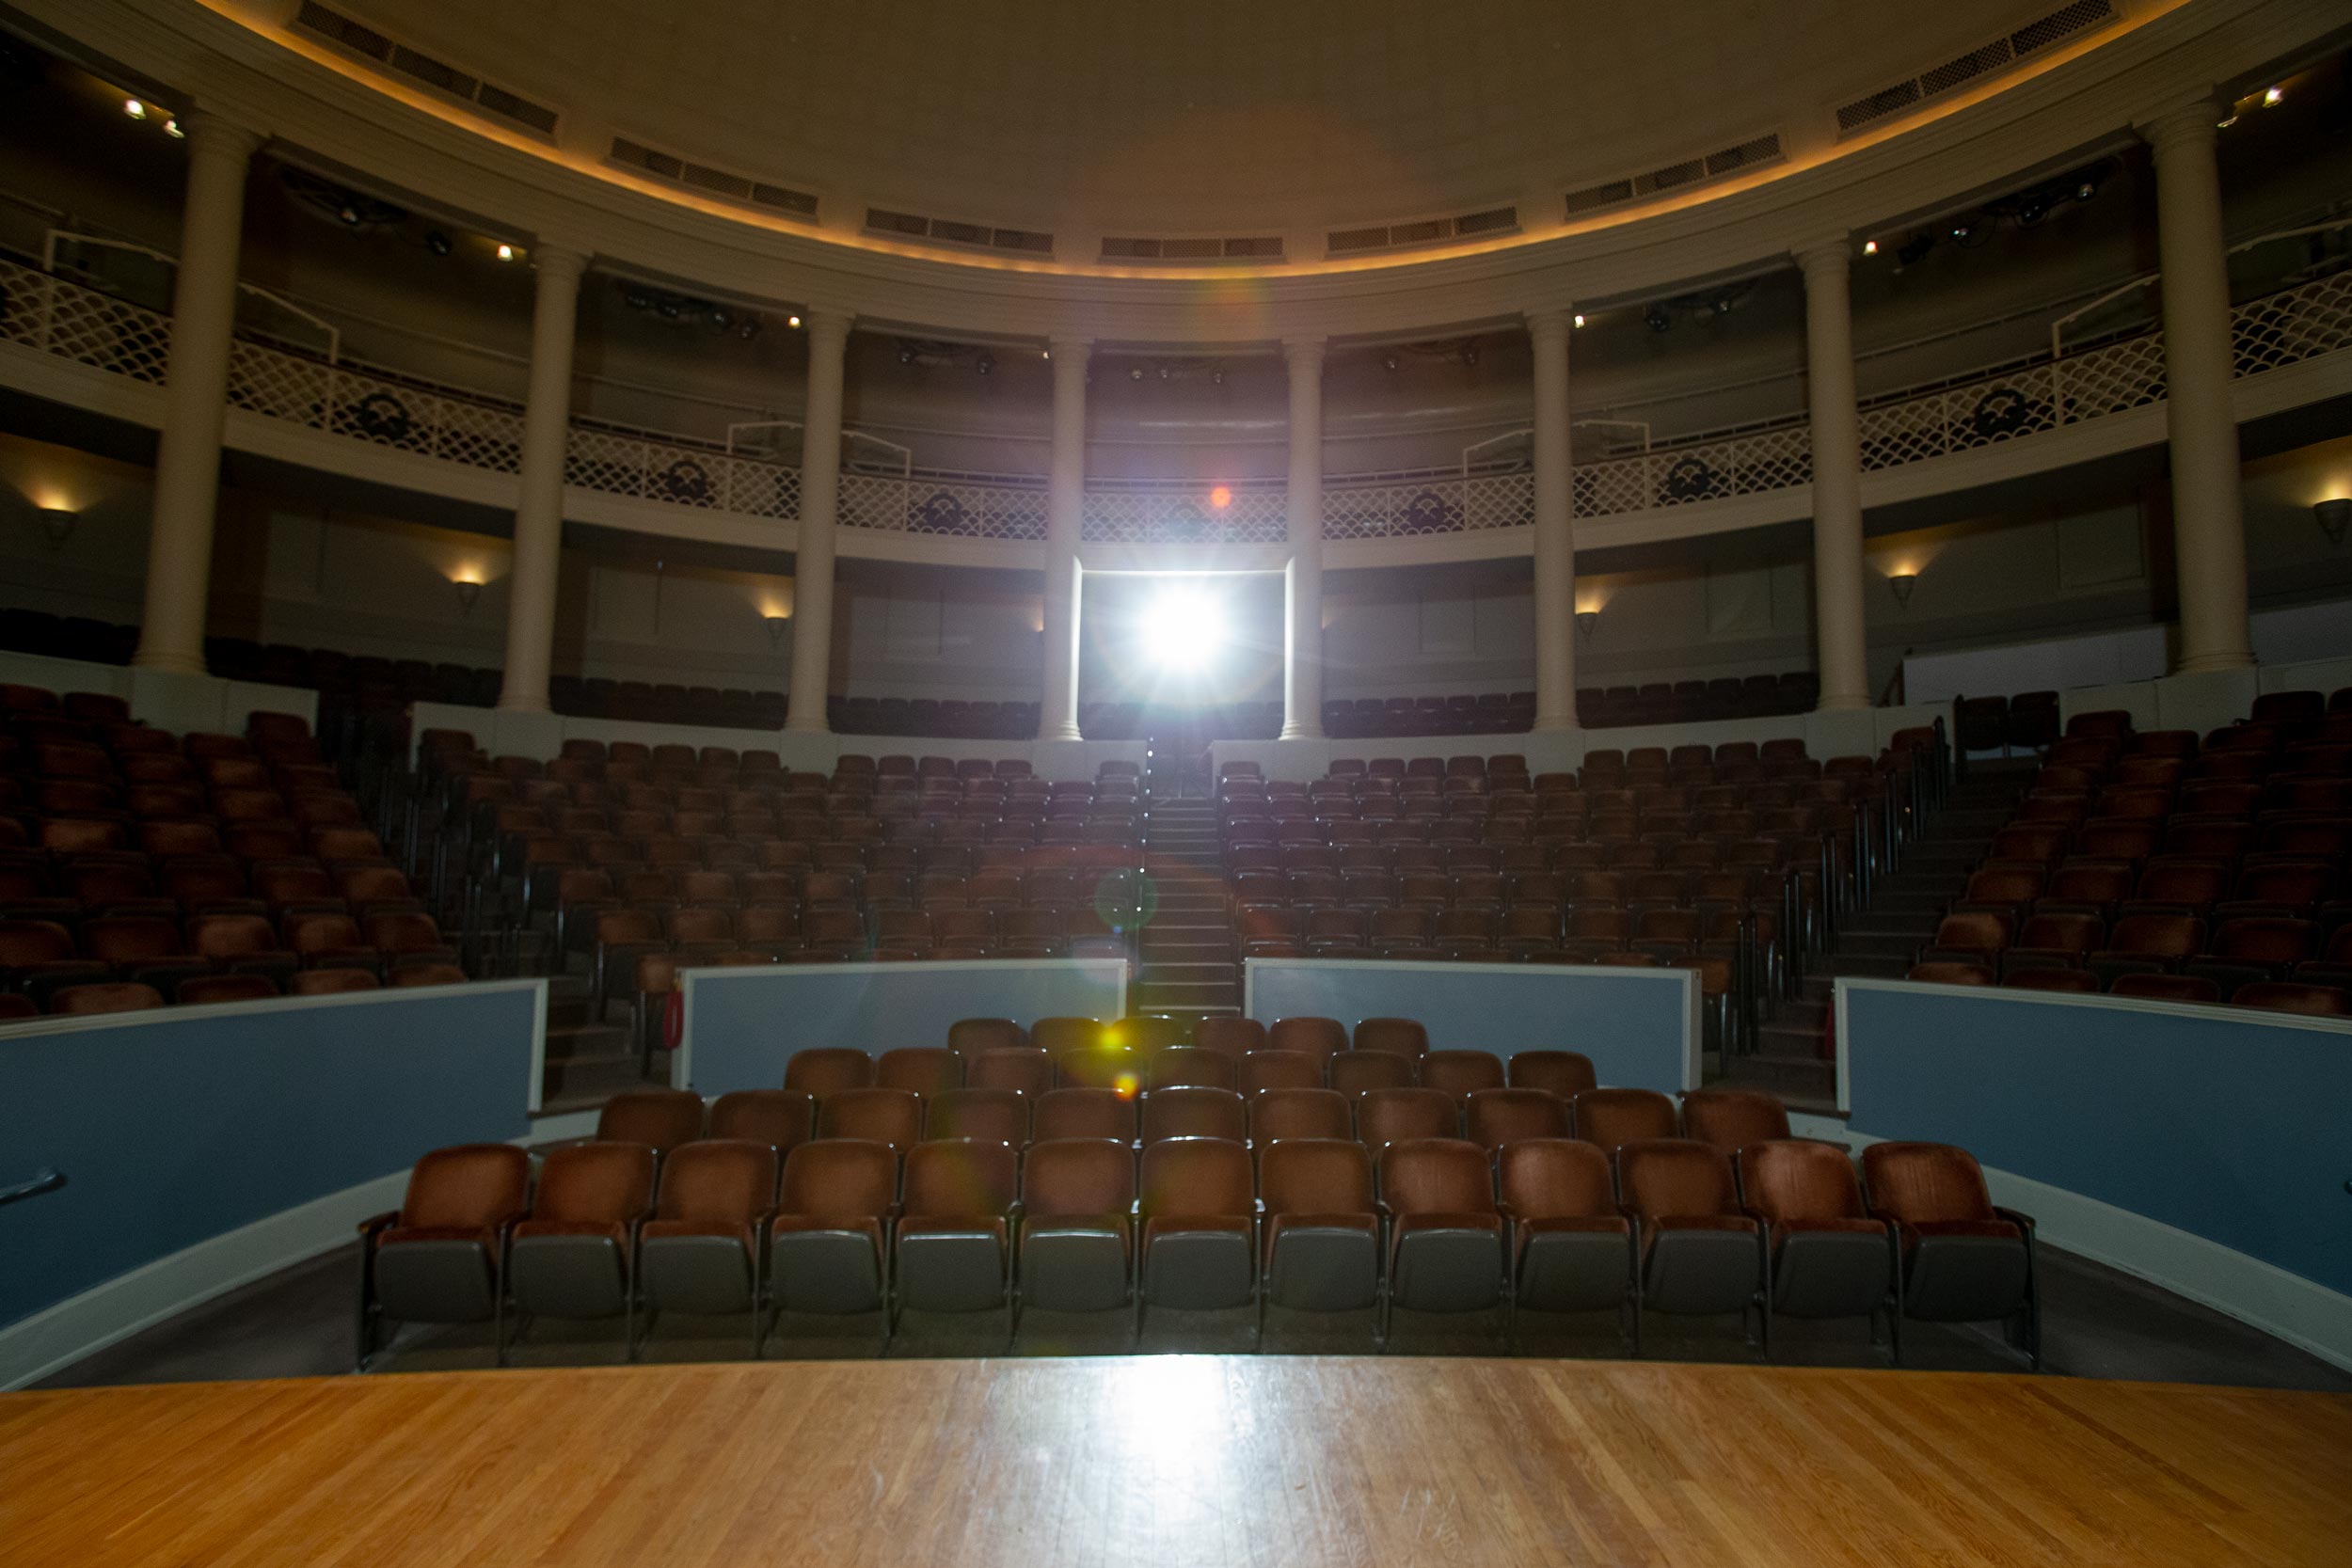 Old Cabell Hall theatre